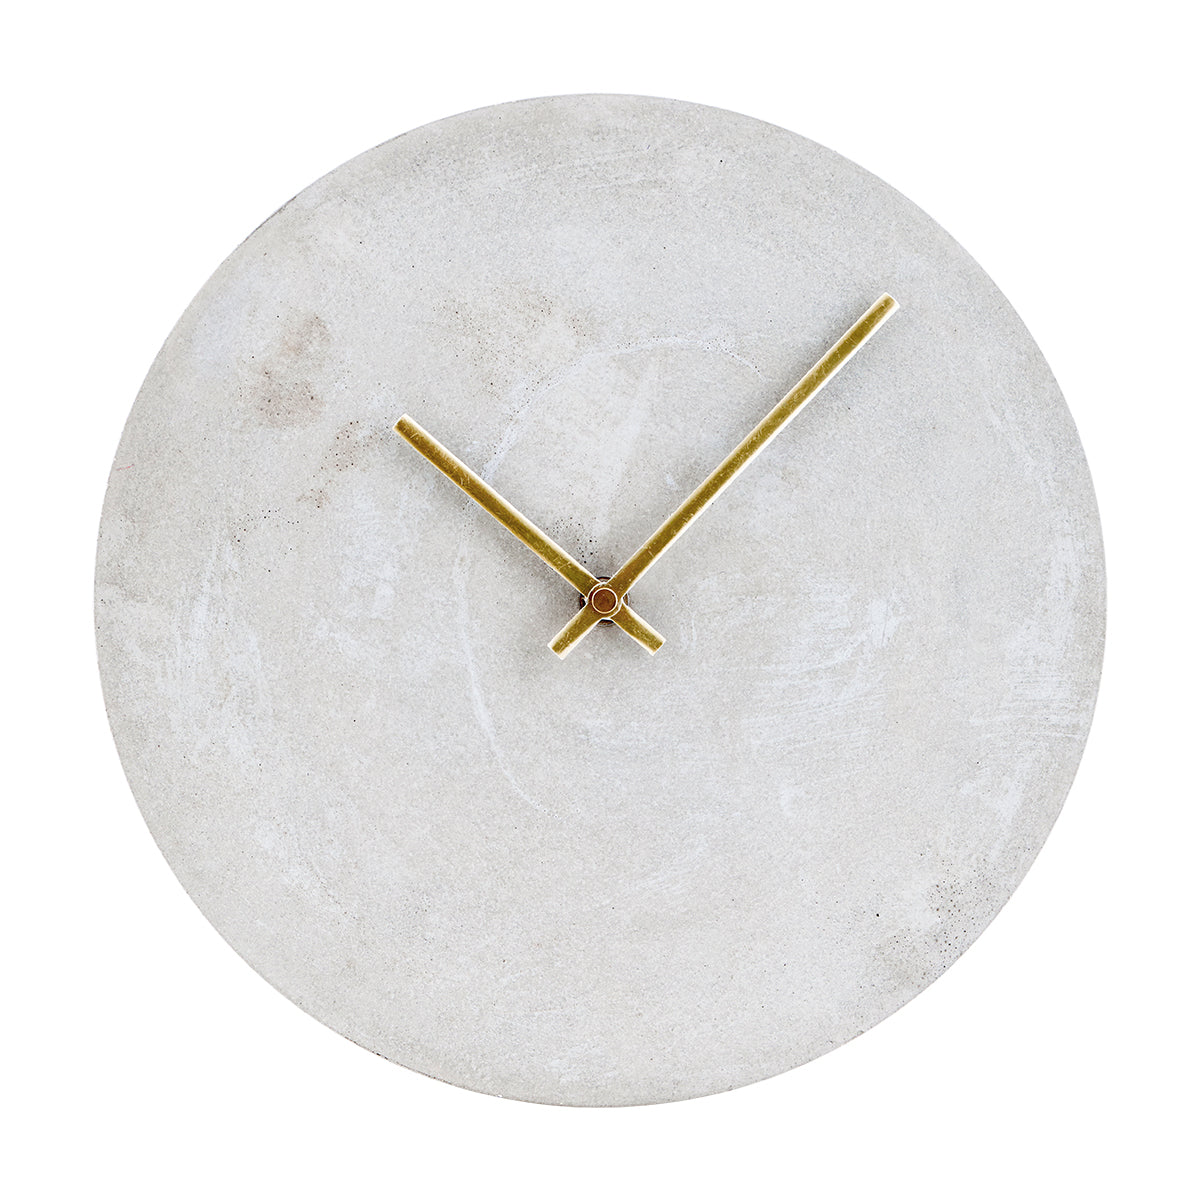 this-industrial-style-concrete-clock-with-brass-handles-is-available-to-buy-in-the-warehouse-home-shop